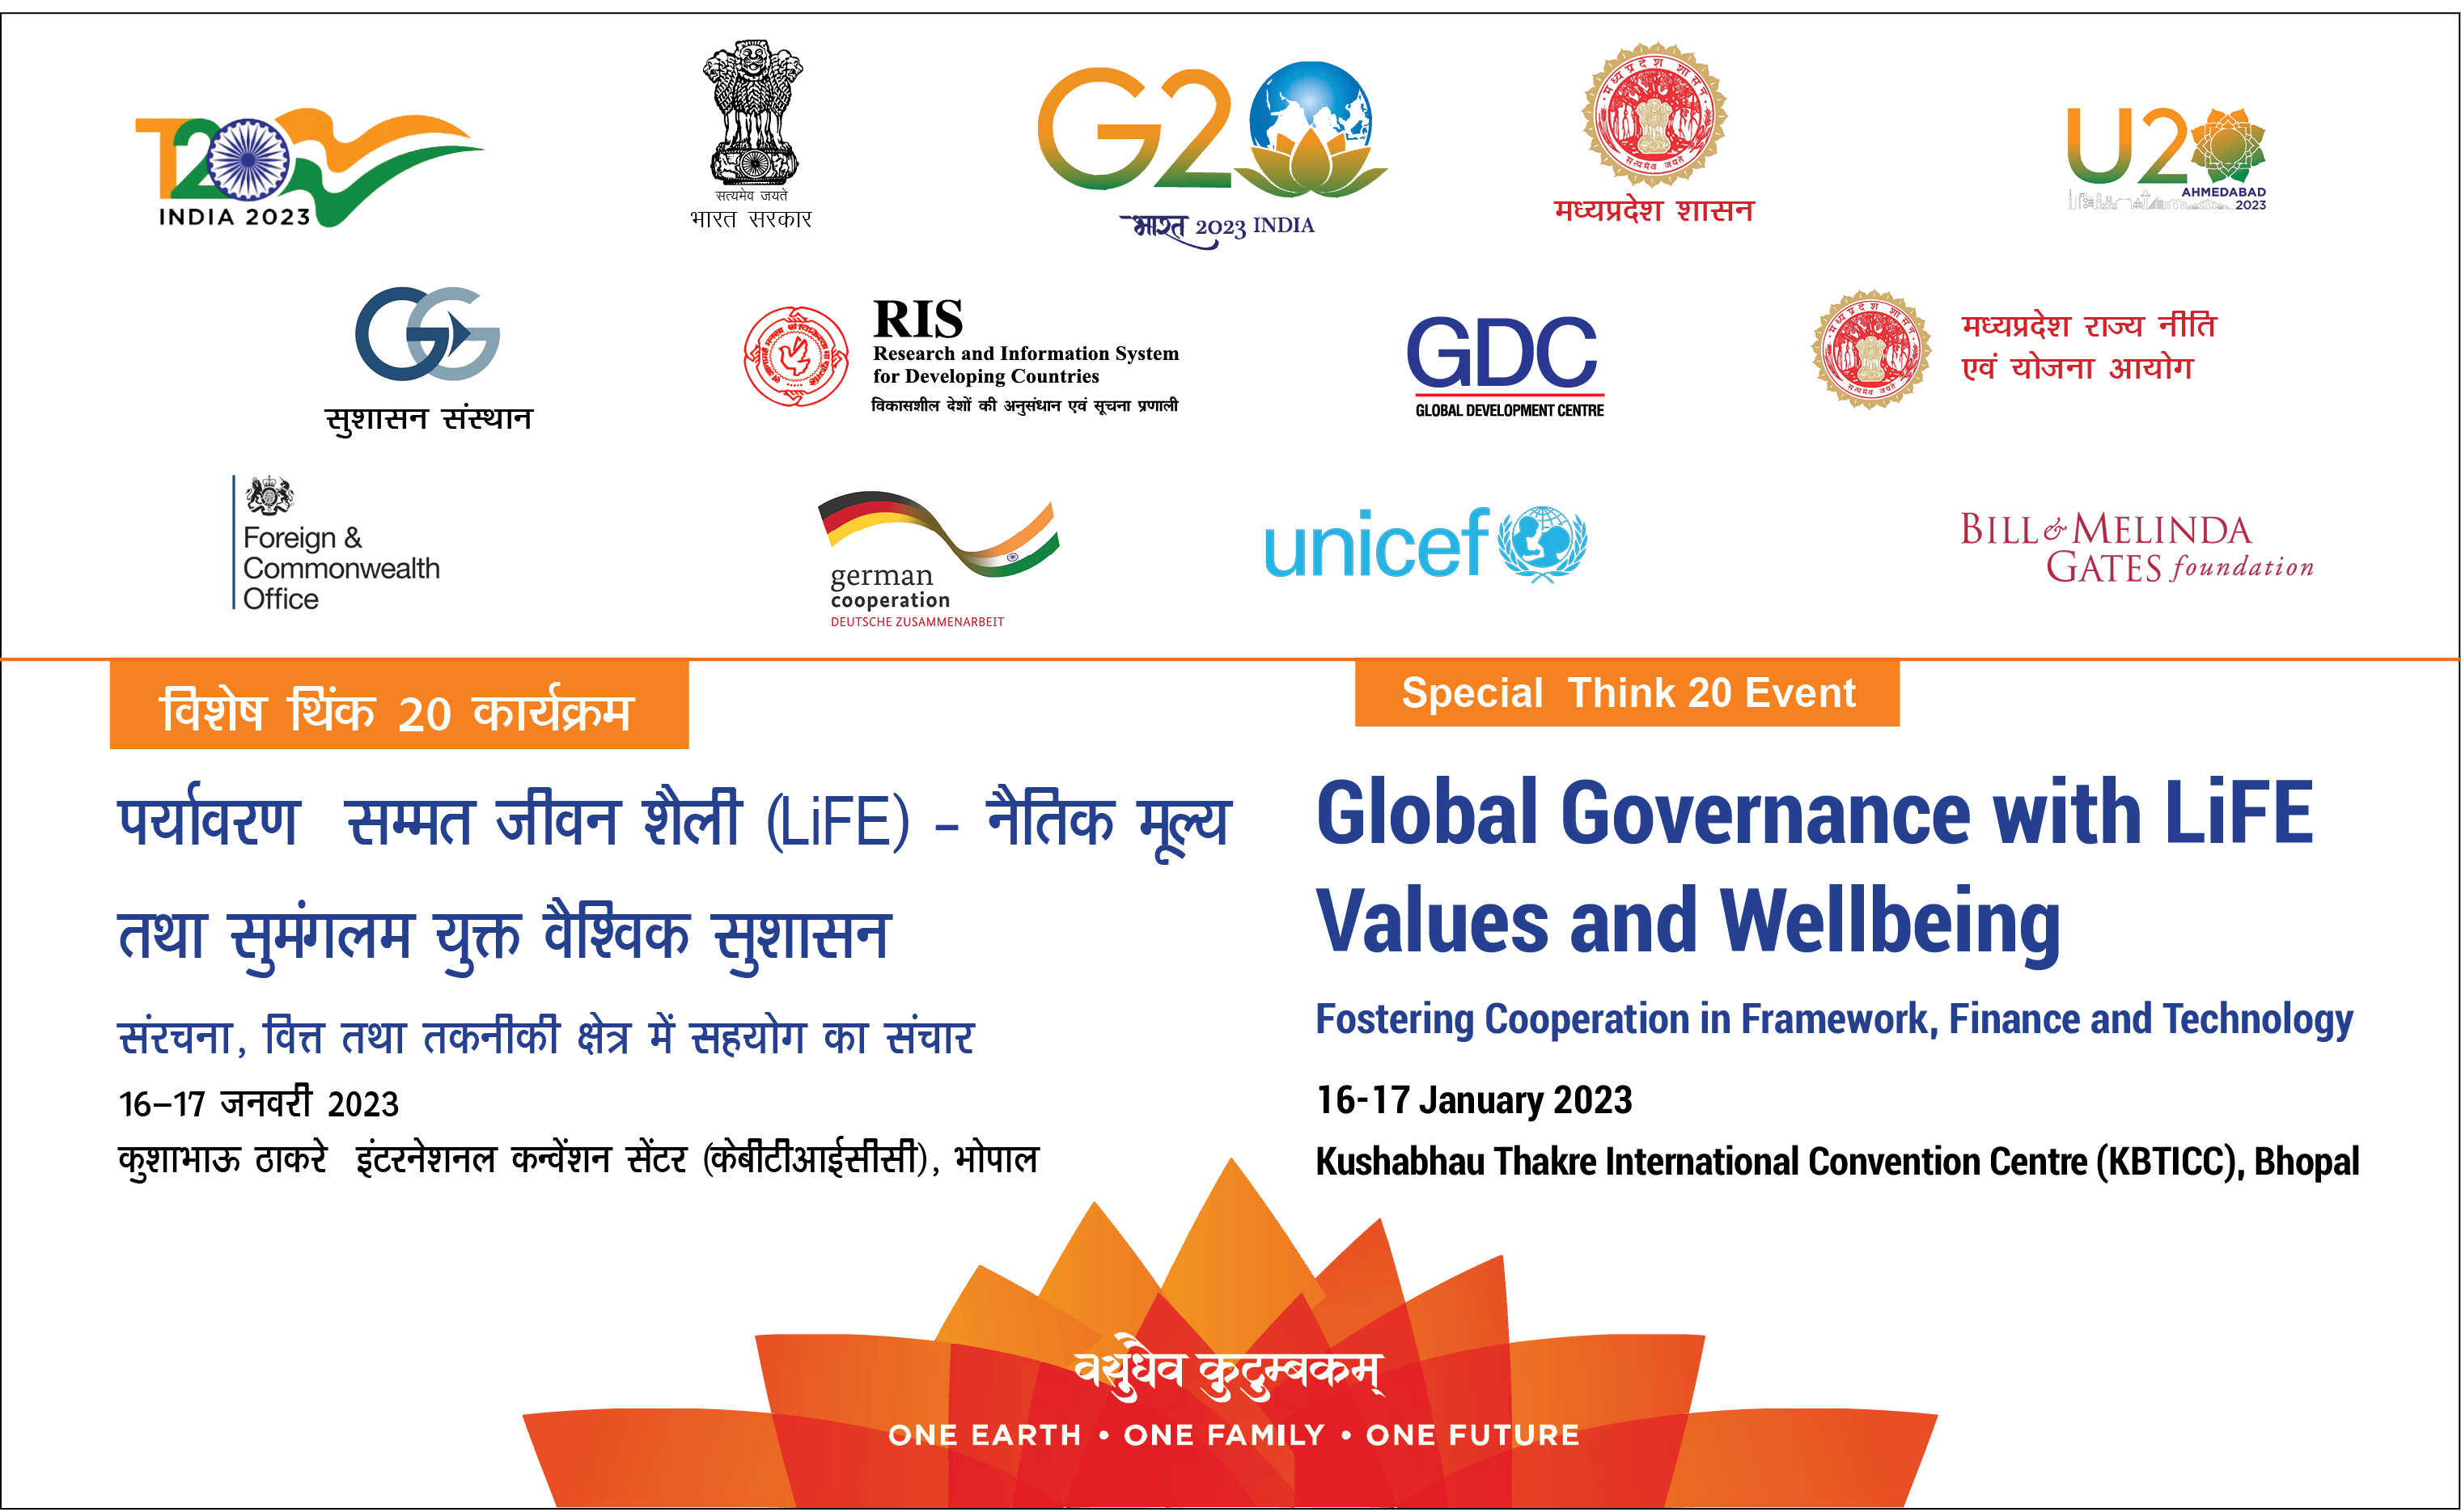 Global Governance with LiFE, Values and Wellbeing